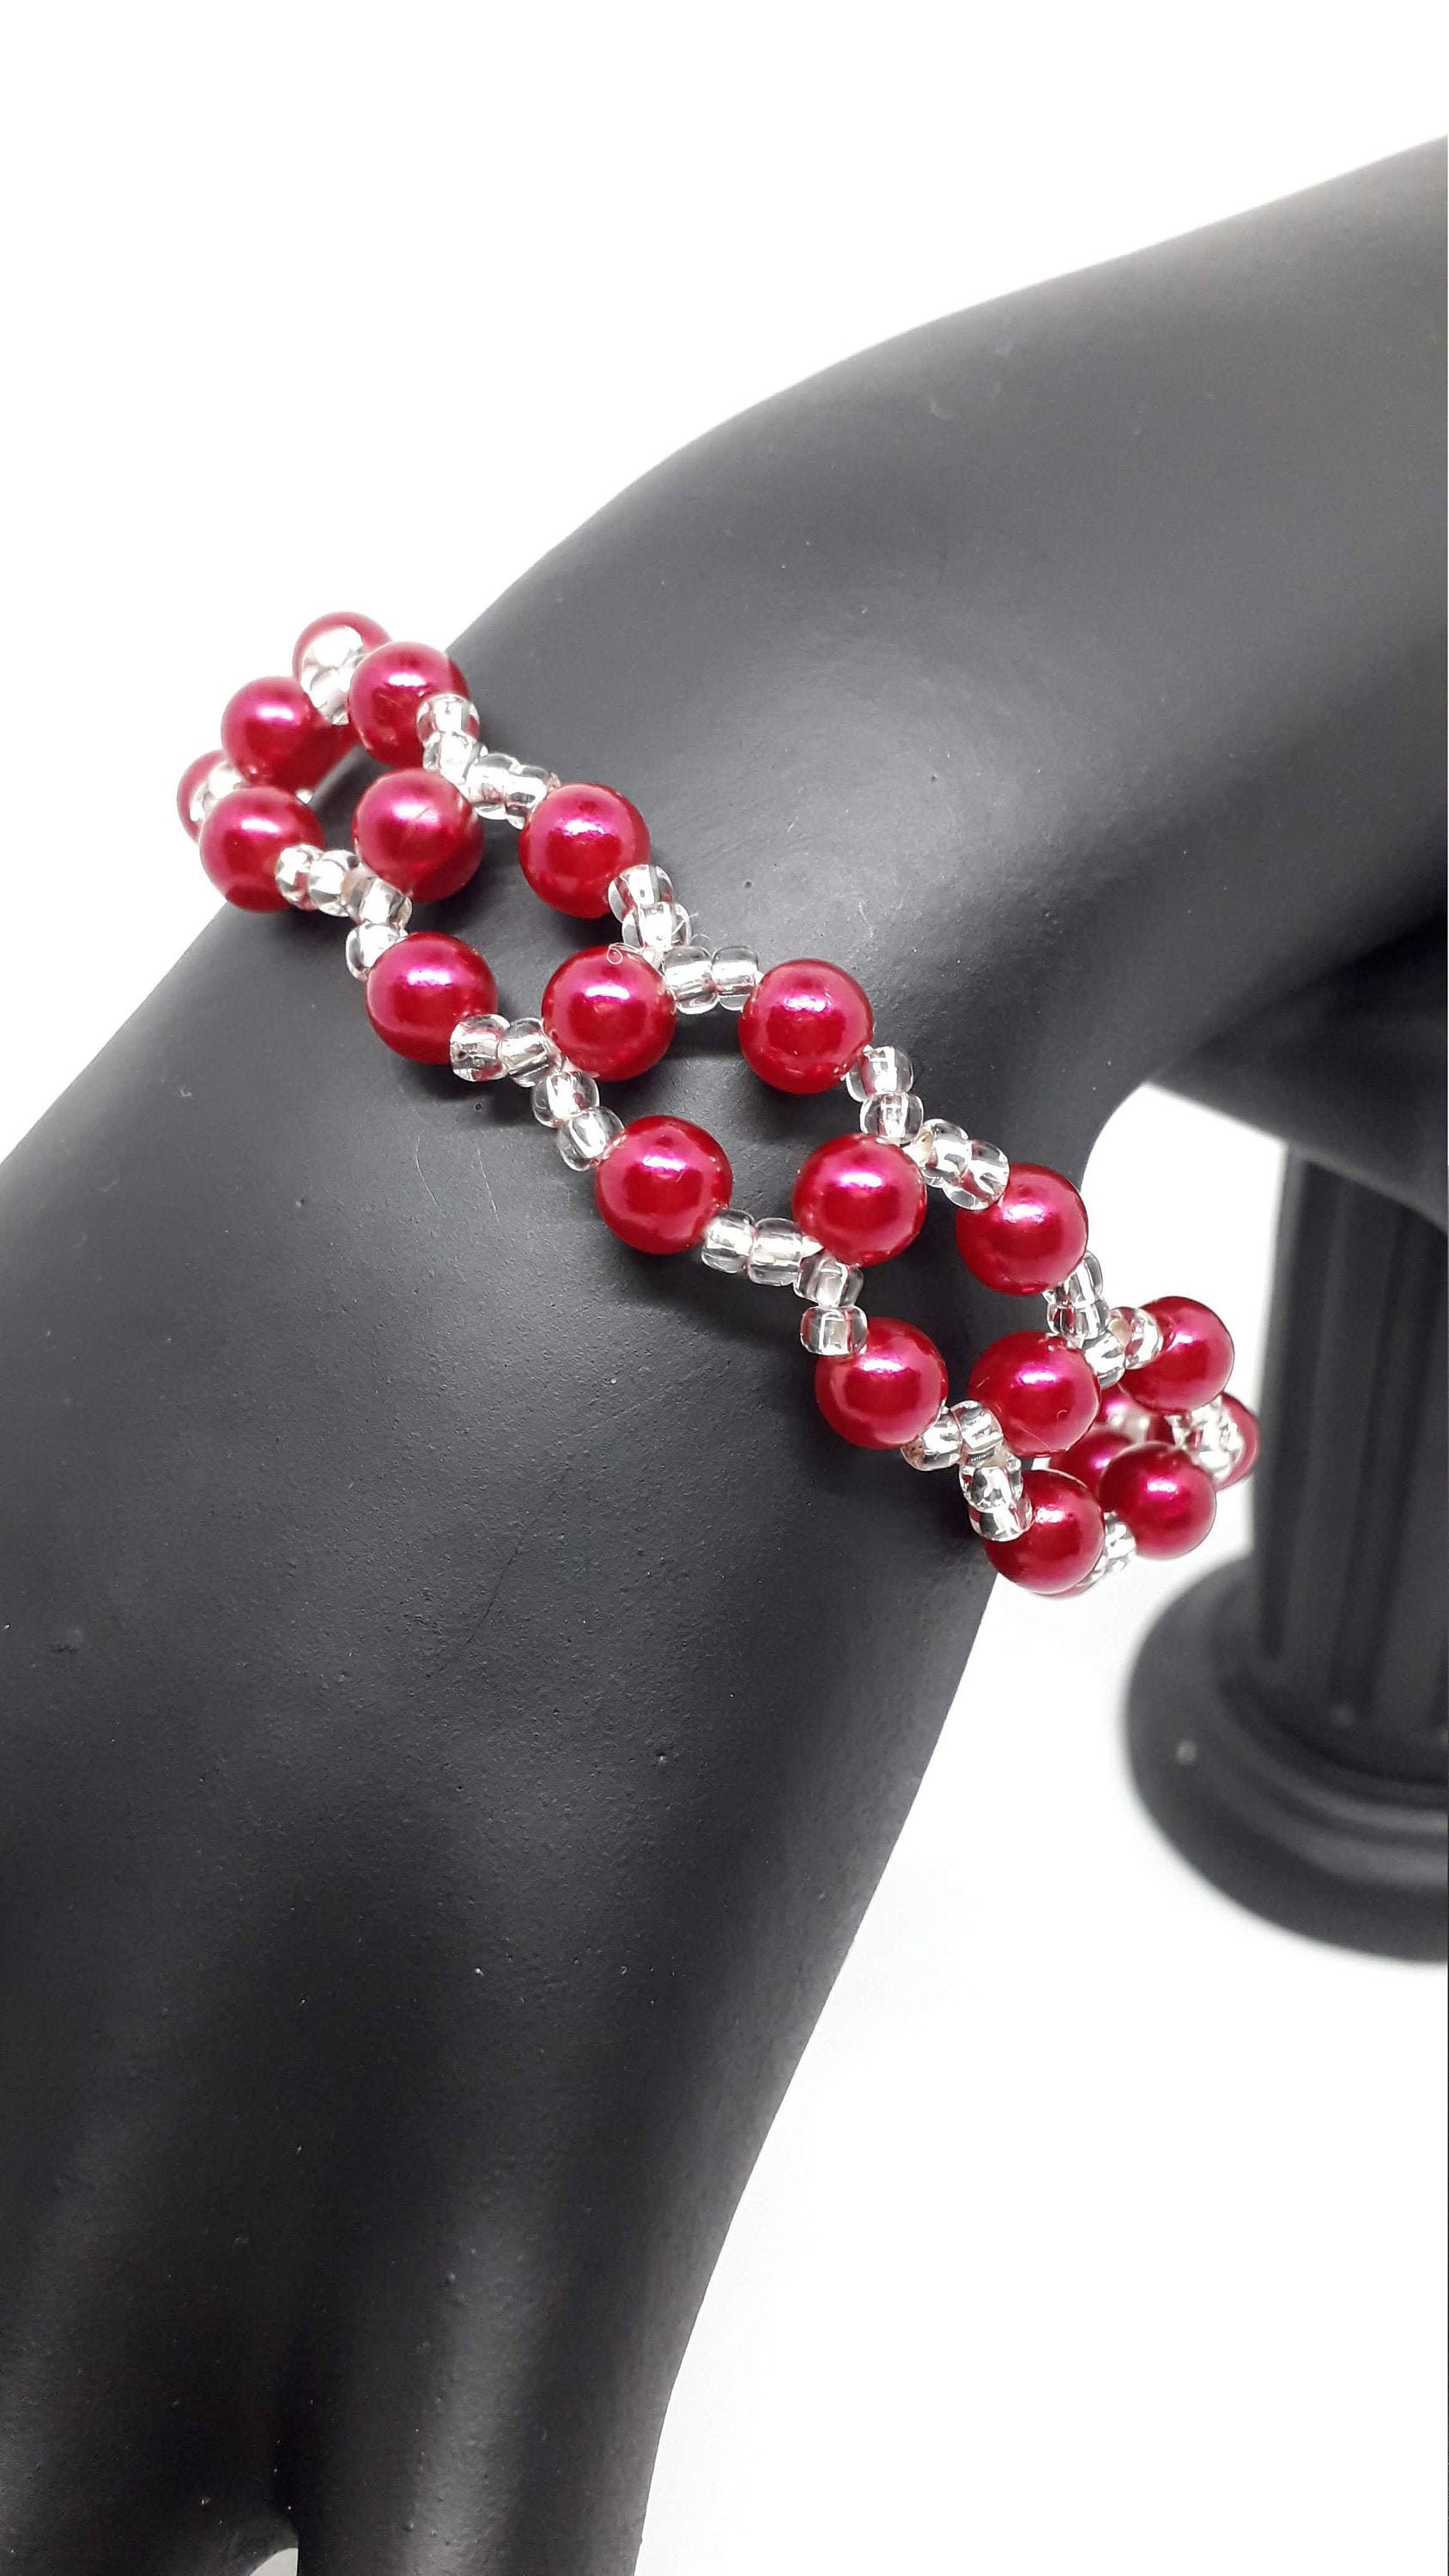 Bracelet Pearls Stretch Red Cherry Pearl Bracelet Silver Seed - Etsy